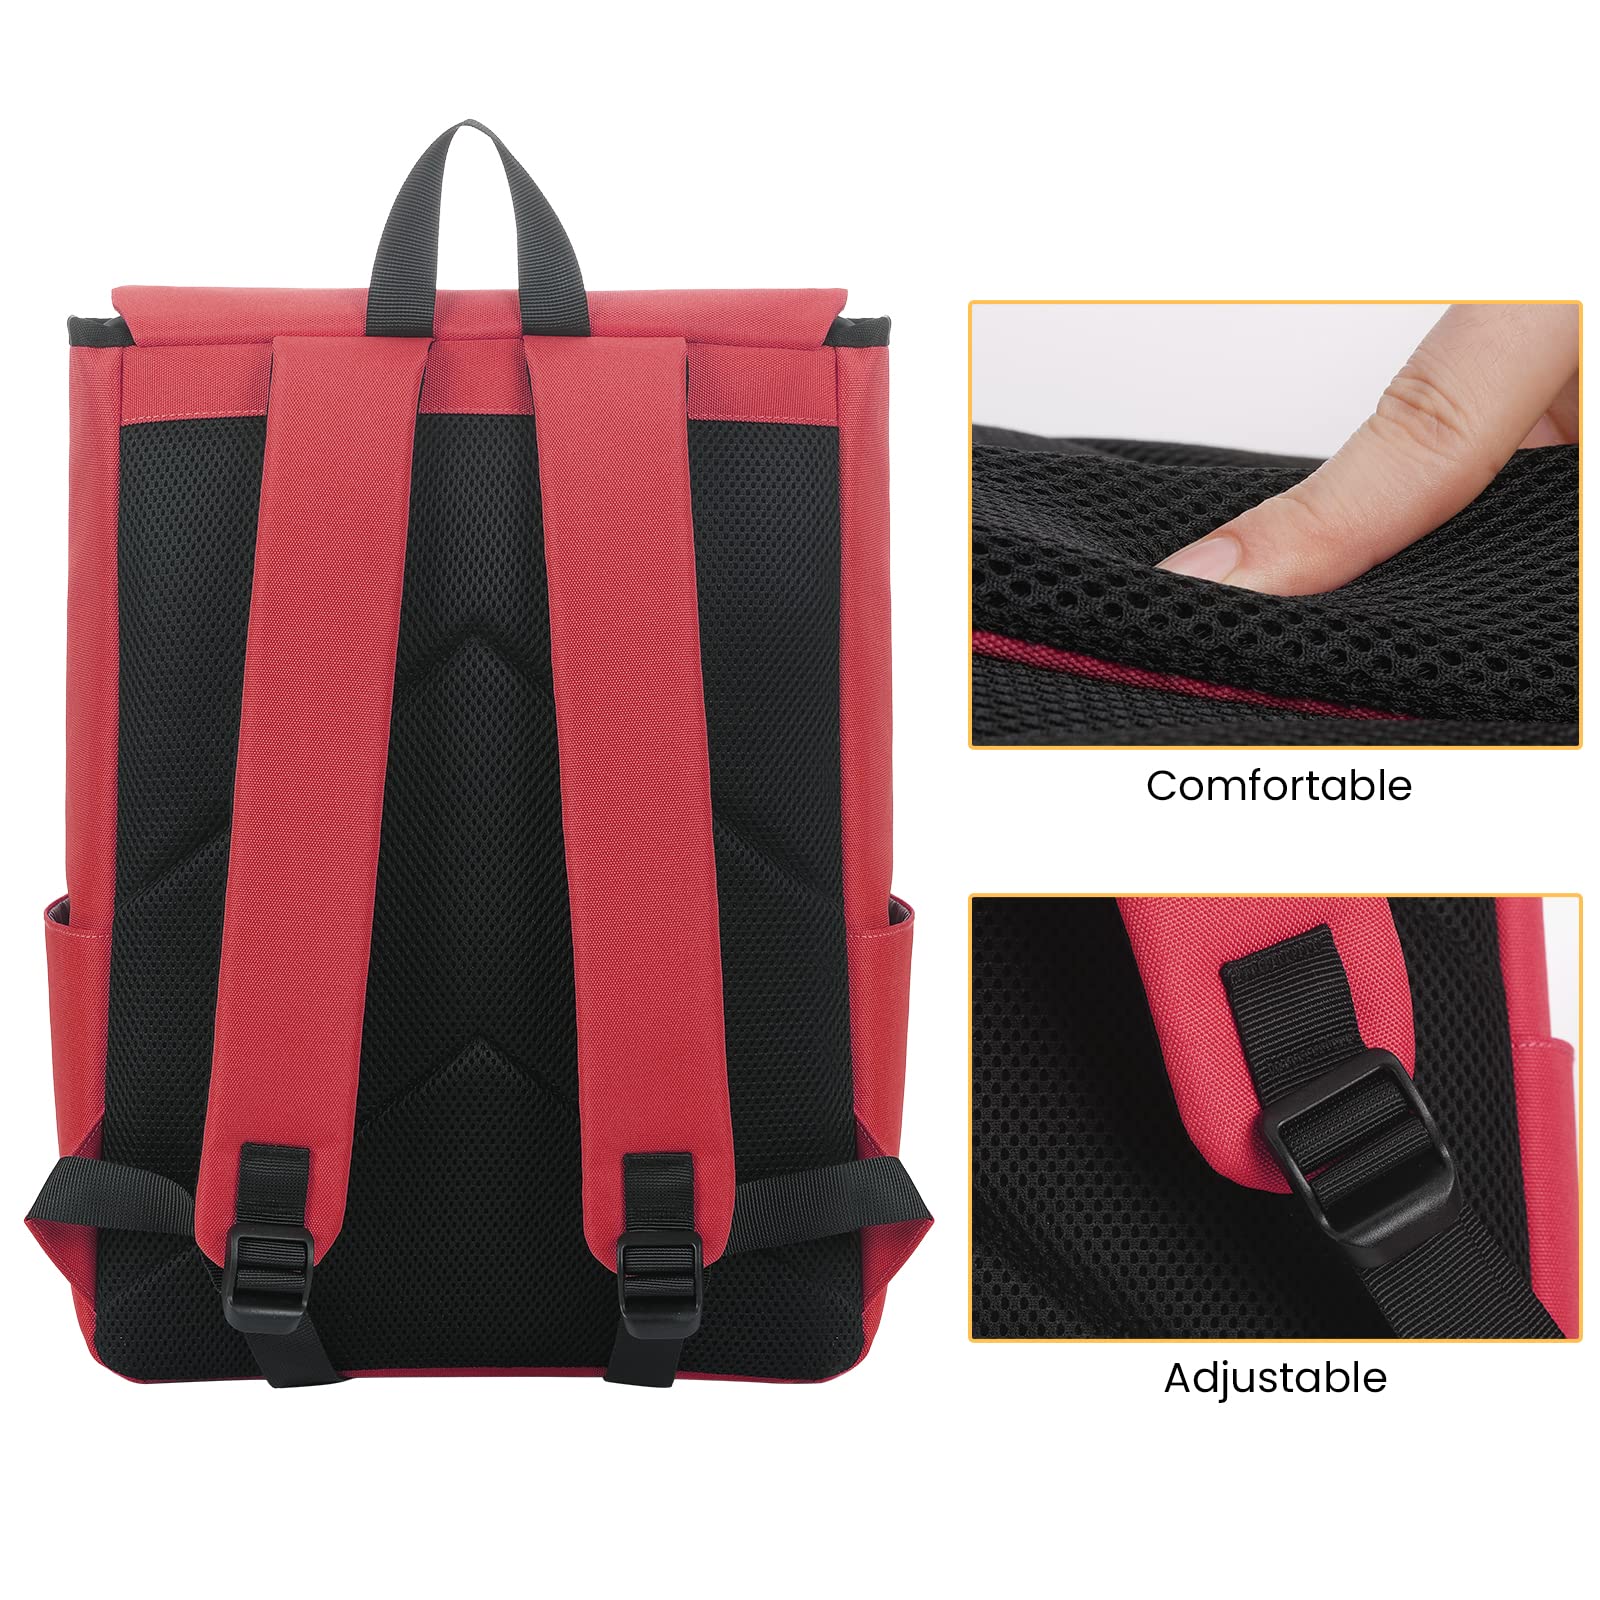 ECHSRT Laptop Backpack Water Resistant Backpack Fits 15.6 Inch Computer & Tablet, Travel Casual Daypack for Women Men, Red